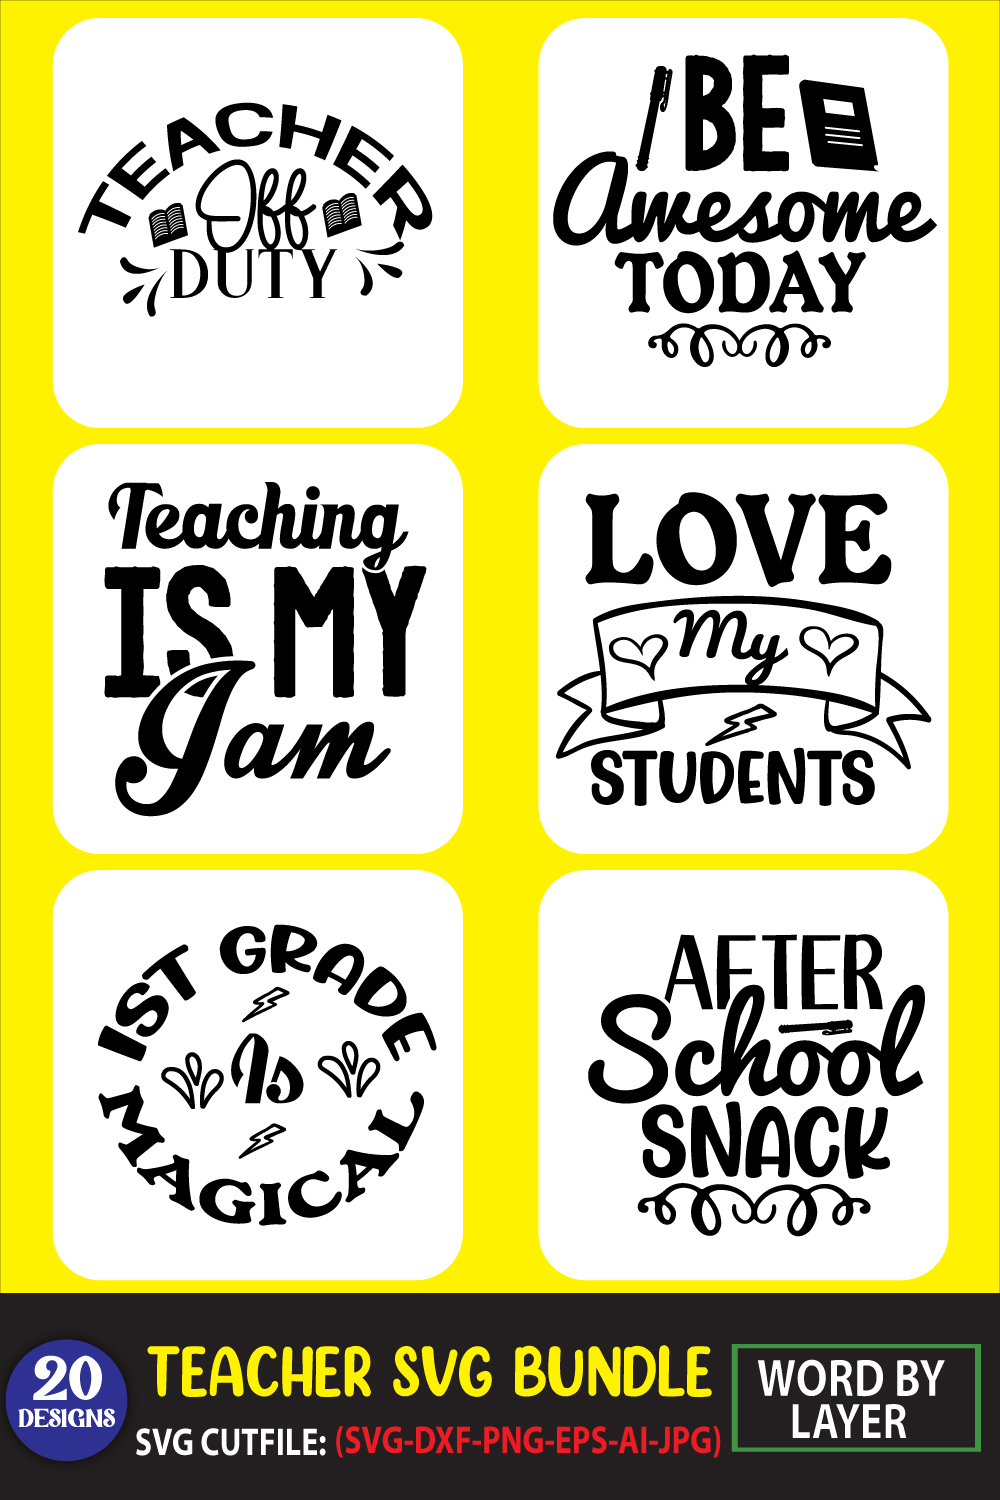 A set of great images for prints on the theme of the teacher